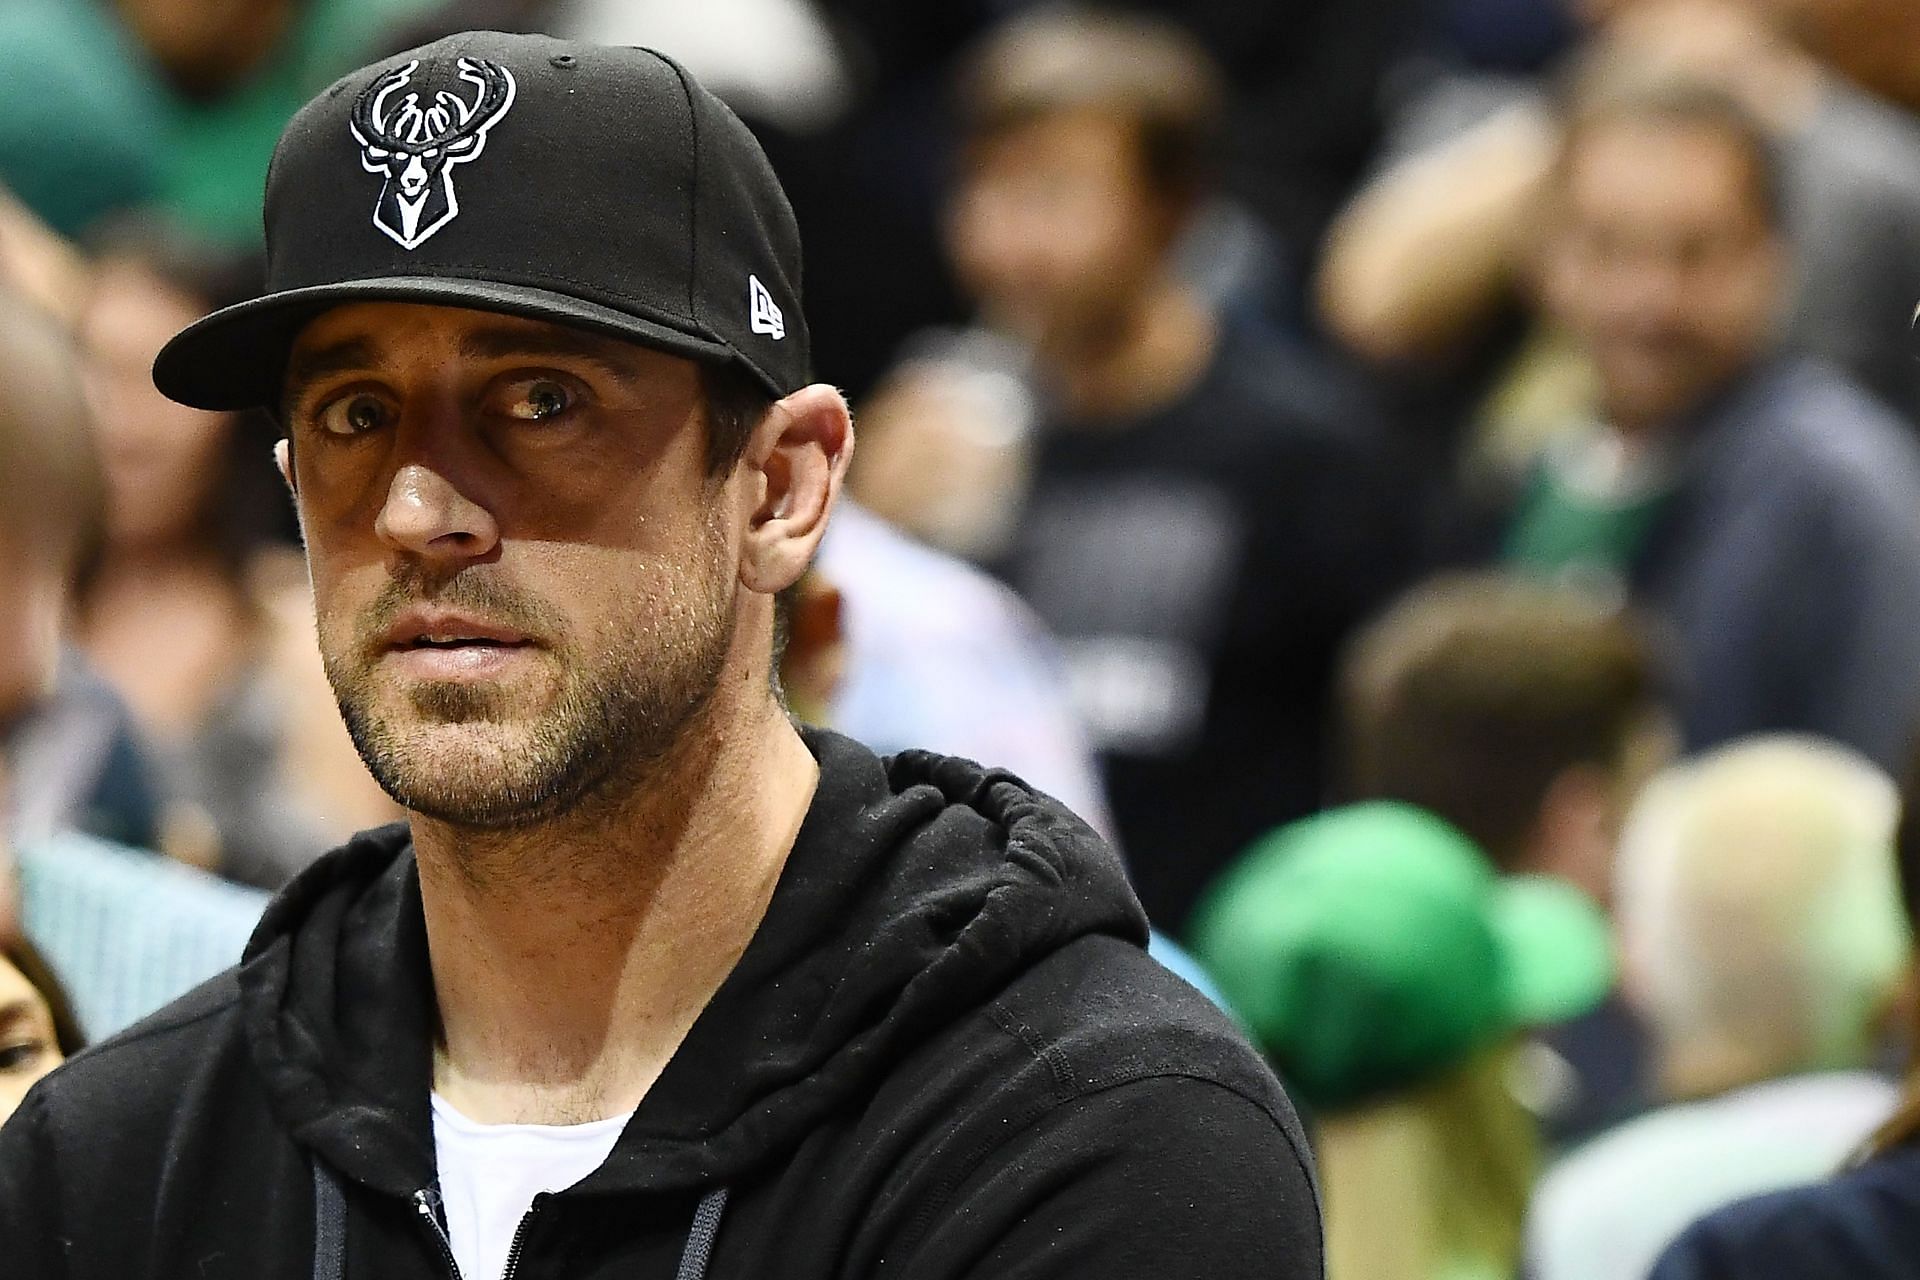 Green Bay Packers QB Aaron Rodgers attending a Bucks game